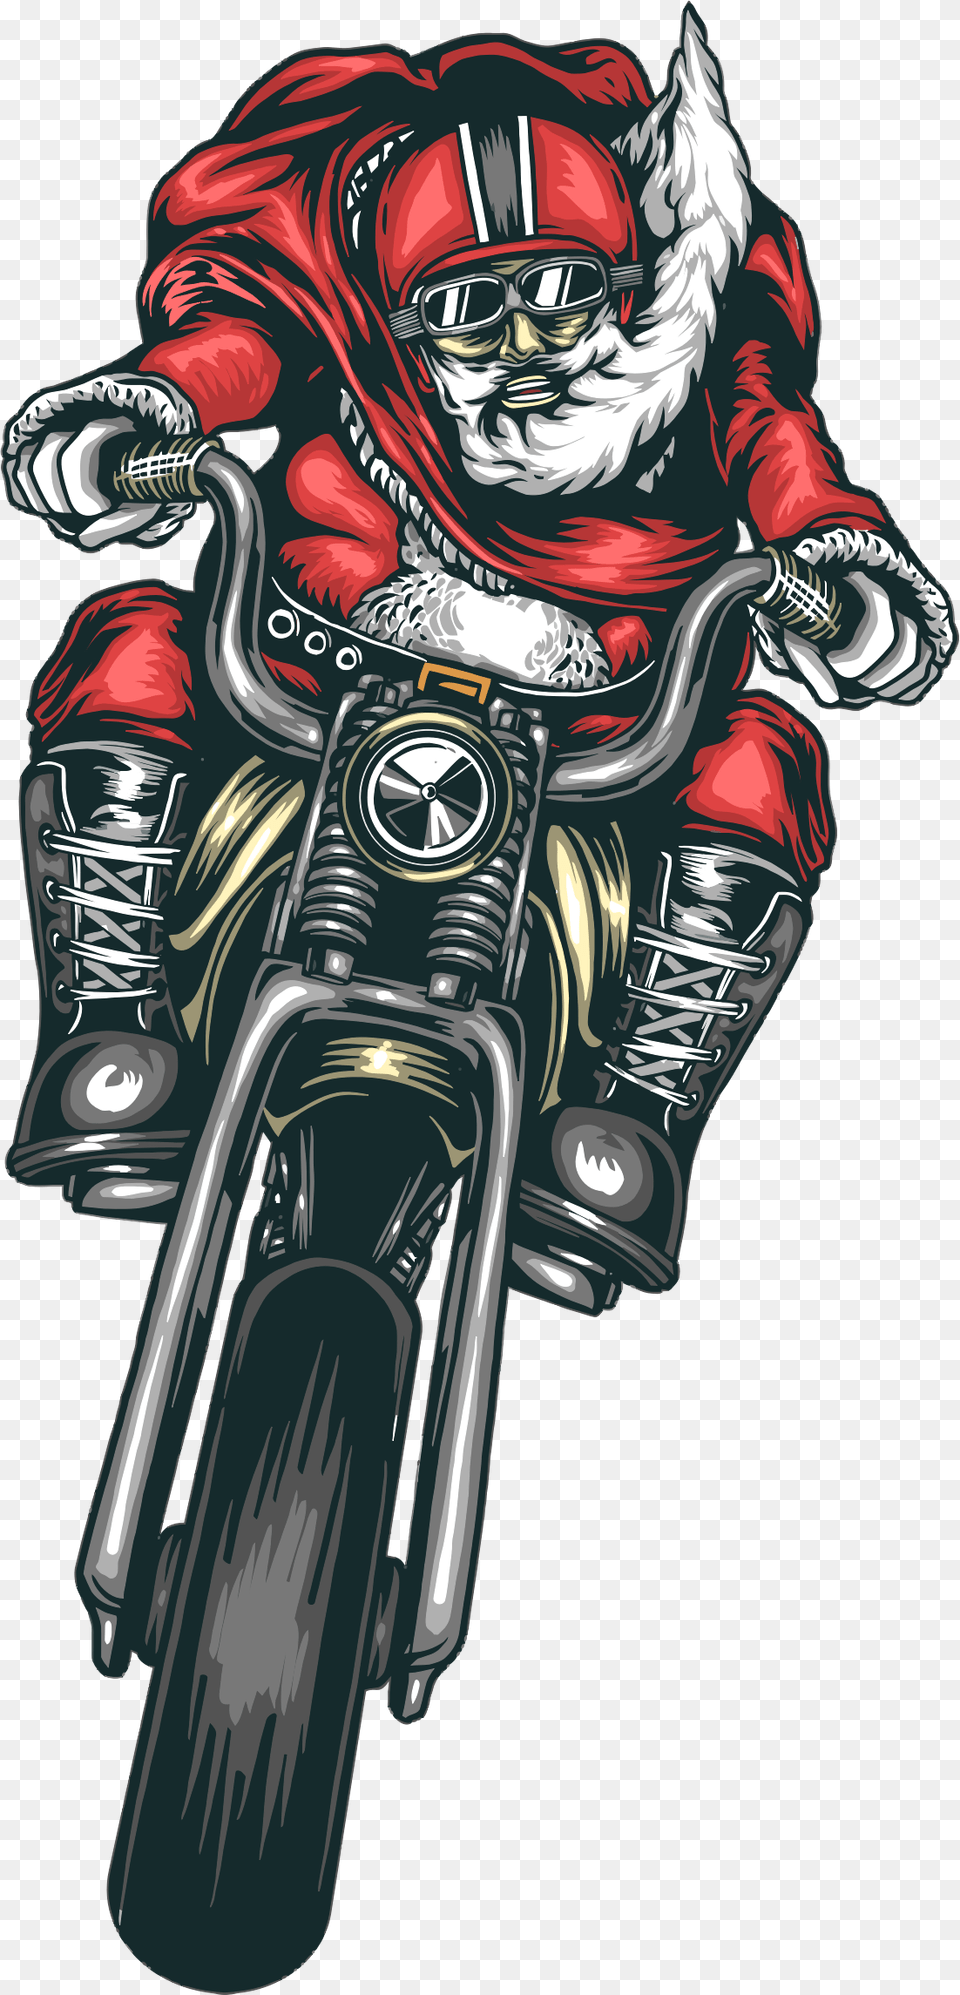 This Icons Design Of Motorcycle Santa, Vehicle, Transportation, Glove, Clothing Free Transparent Png